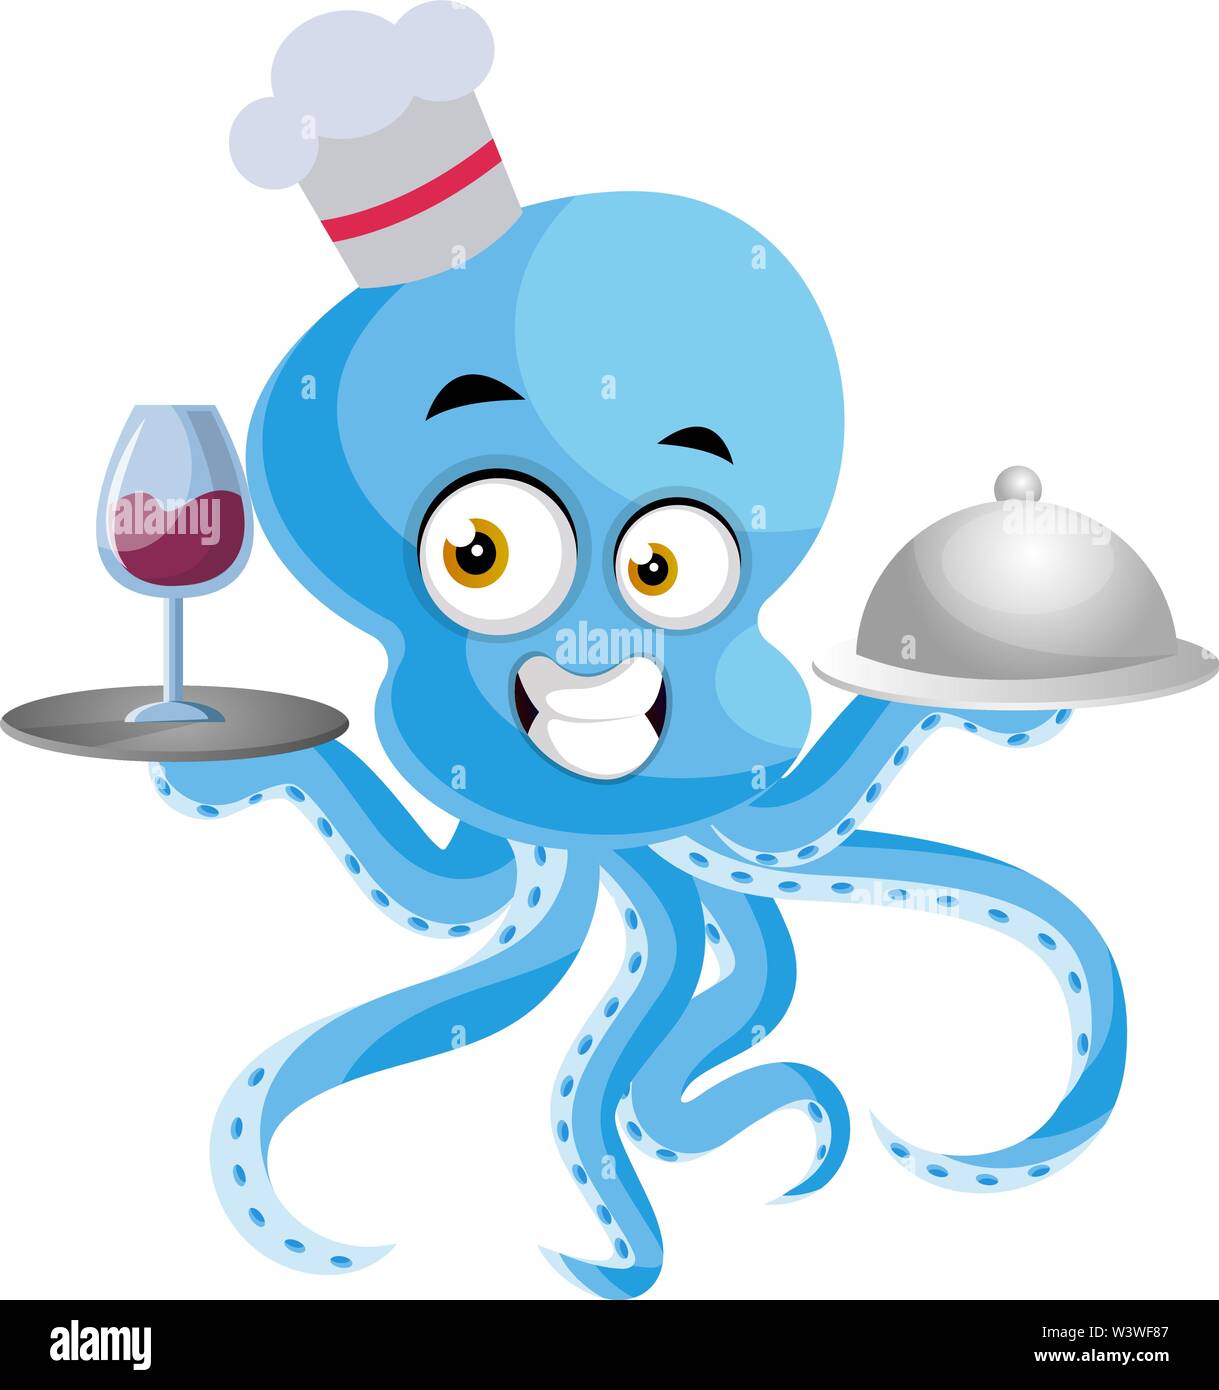 Octopus Cooking Illustration Vector On White Background Stock Vector Image Art Alamy,Data Entry At Home Jobs Australia